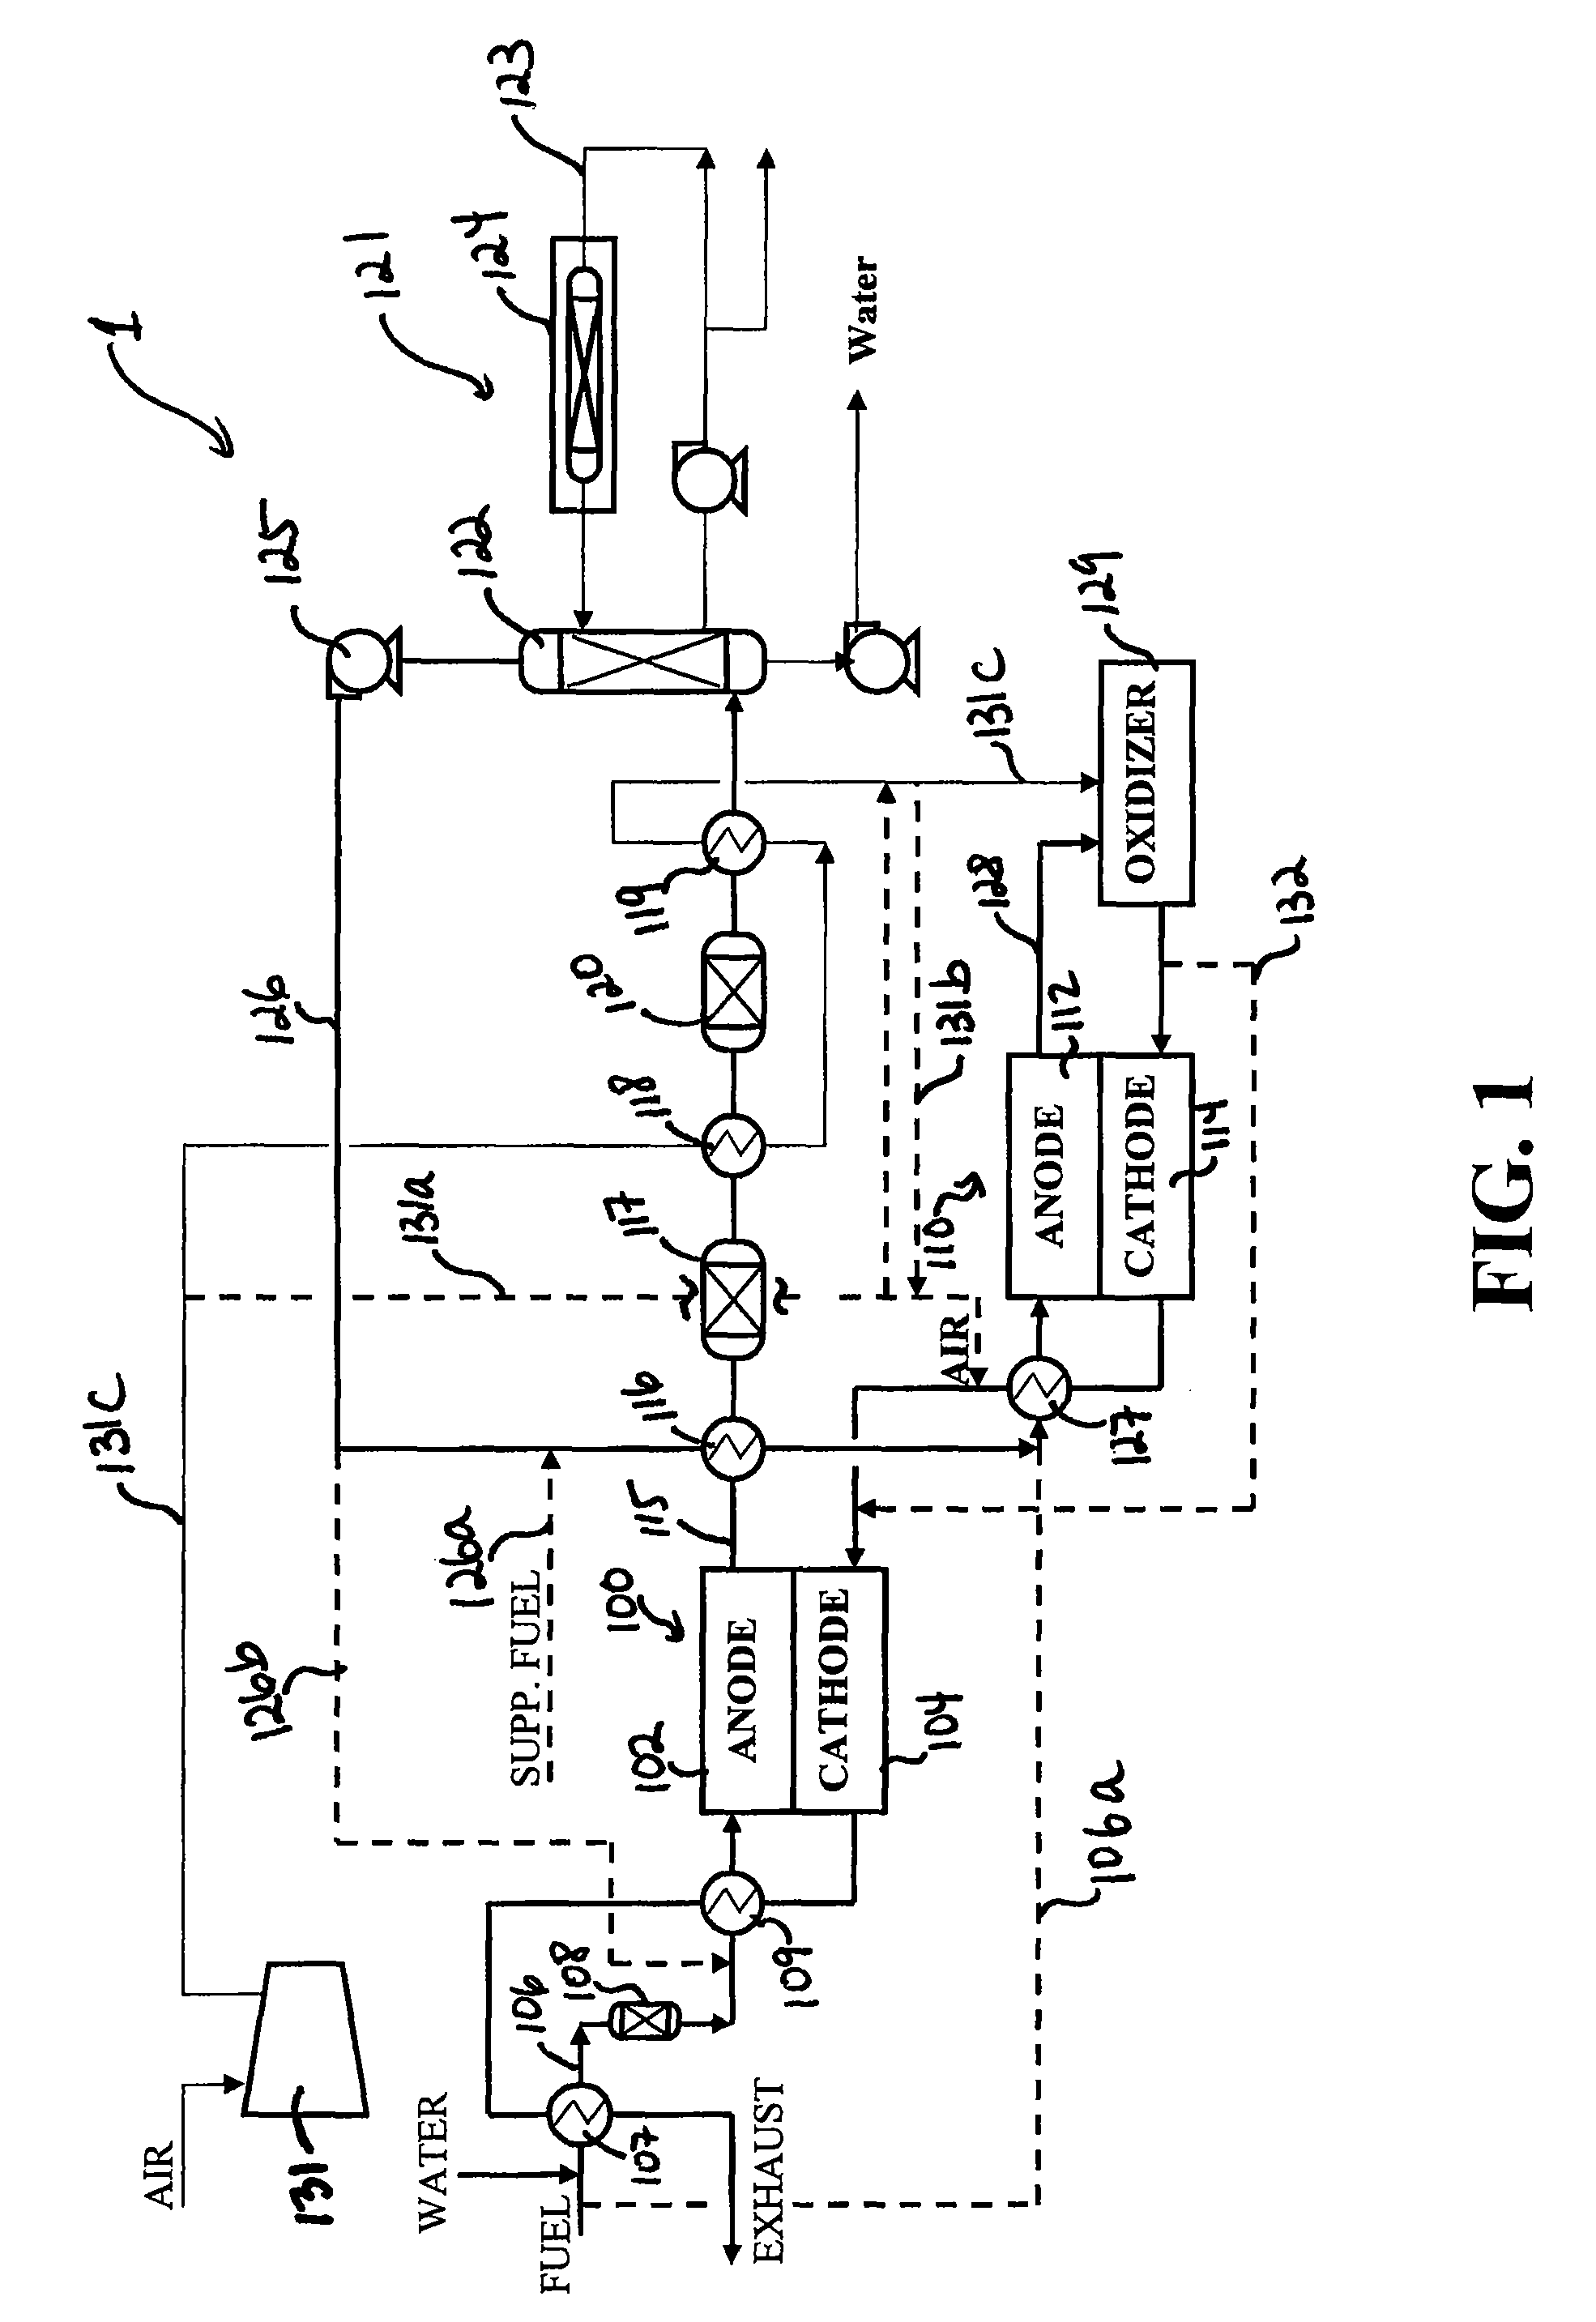 High-efficiency dual-stack molten carbonate fuel cell system